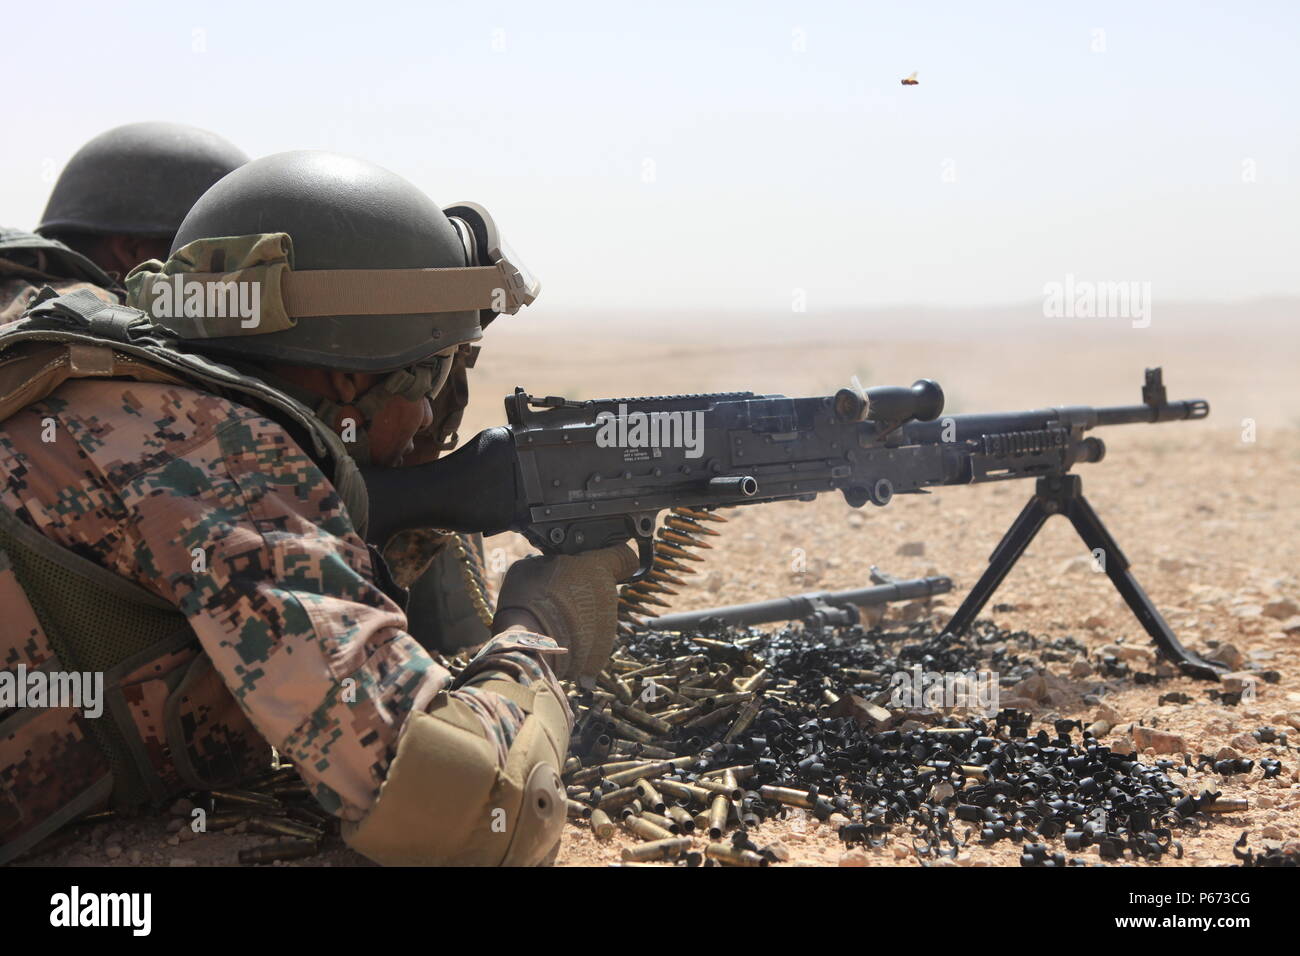 A member of the Jordanian Armed Forces fire a M240 Machine Gun at a quick  reaction force range during exercise Eager Lion 2016 (EL 16), May 17, 2016  at Al Zarqua, Jordan.